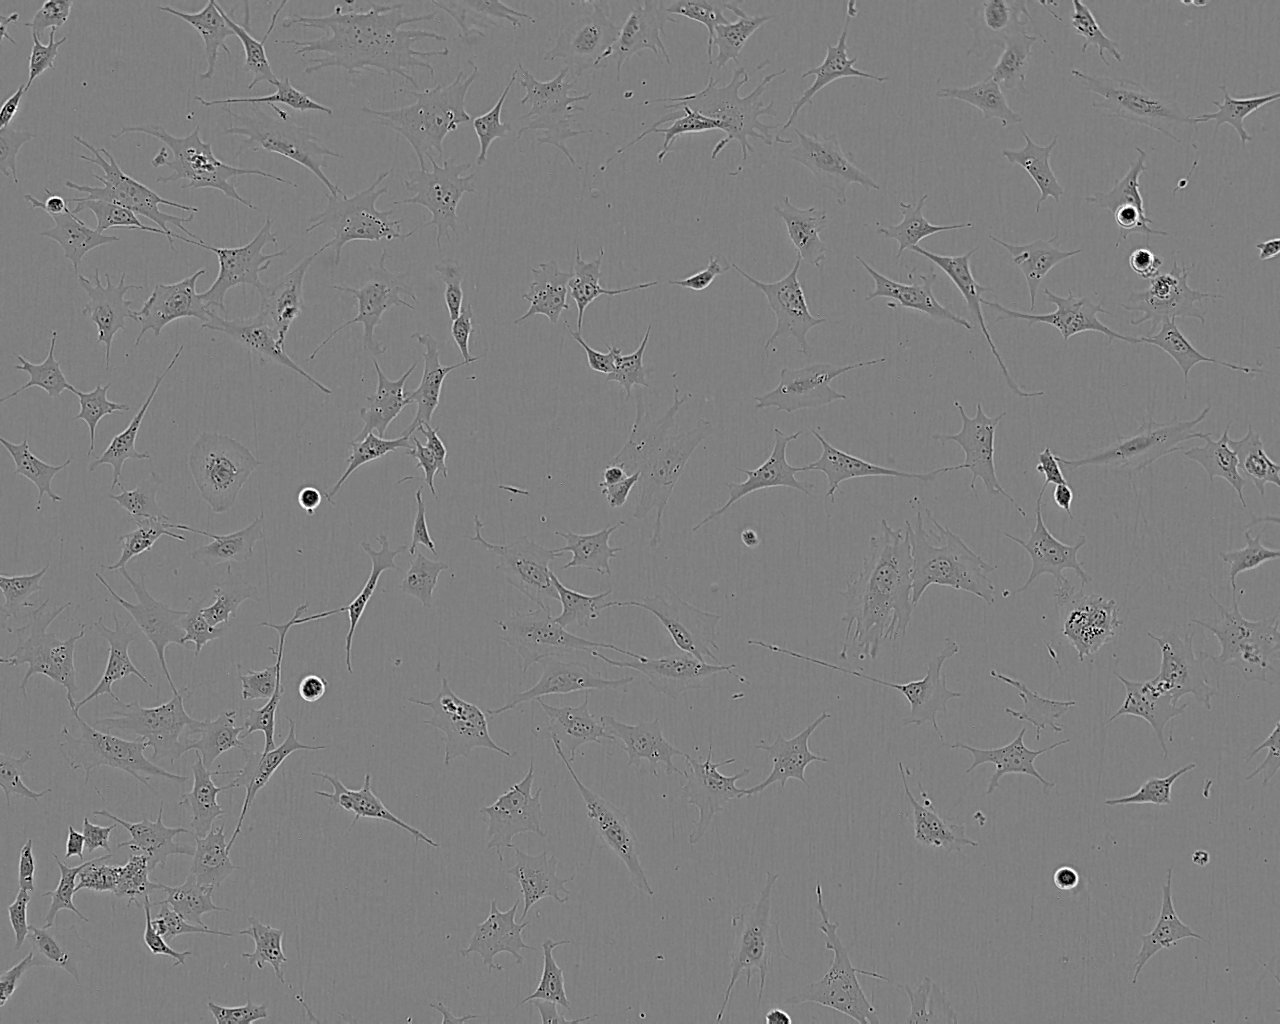 MH-22a epithelioid cells小鼠肝癌细胞系,MH-22a epithelioid cells